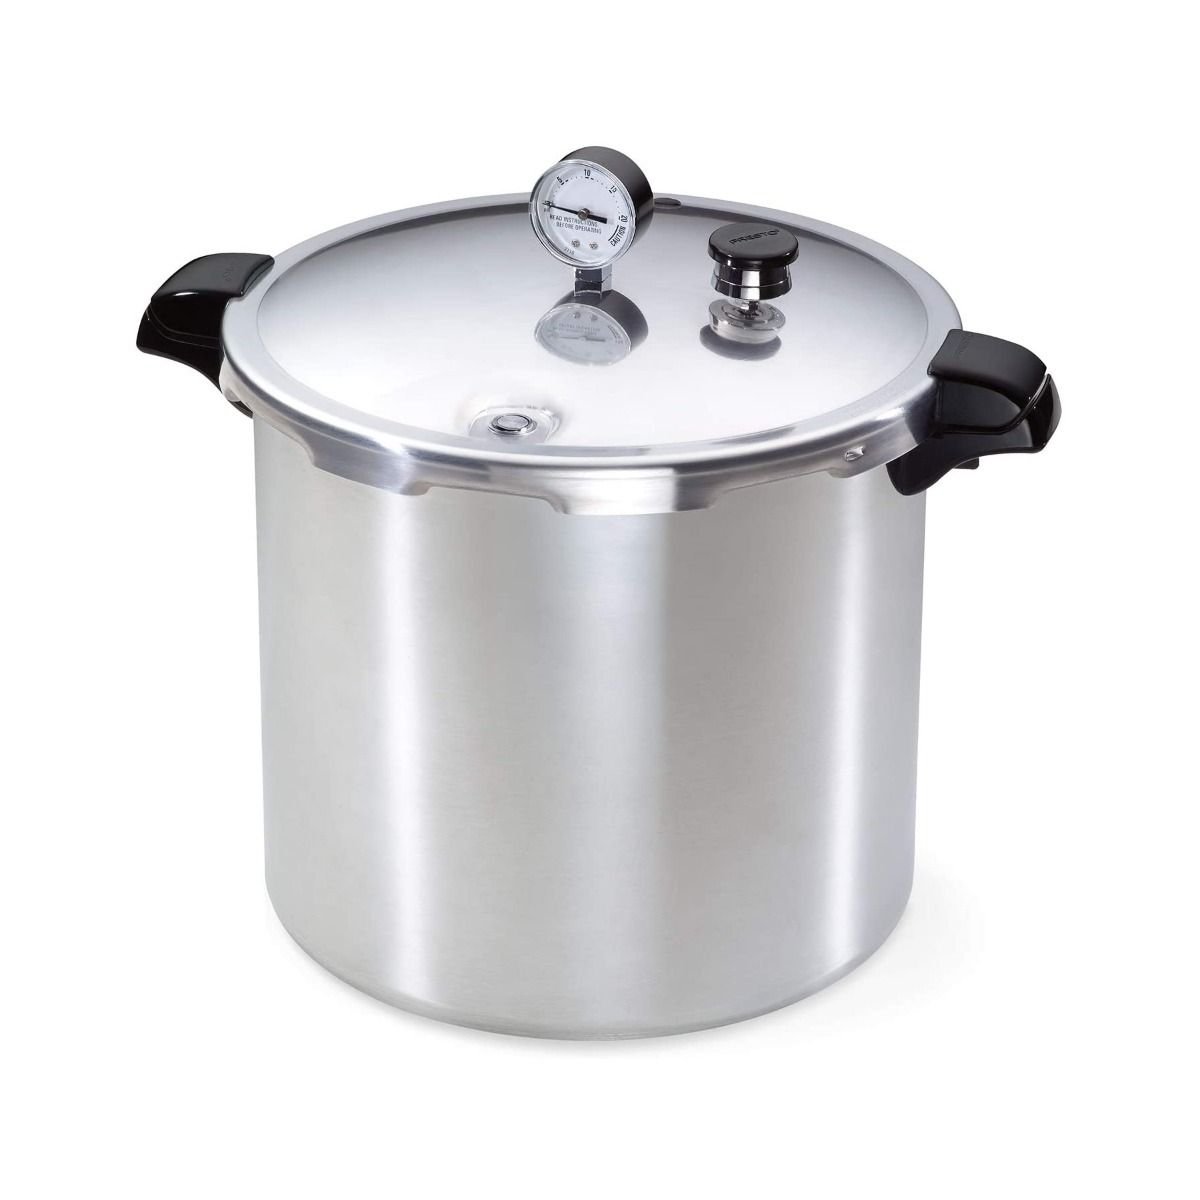 All American 930 30 qt. Canner Pressure Cooker - Silver for sale online